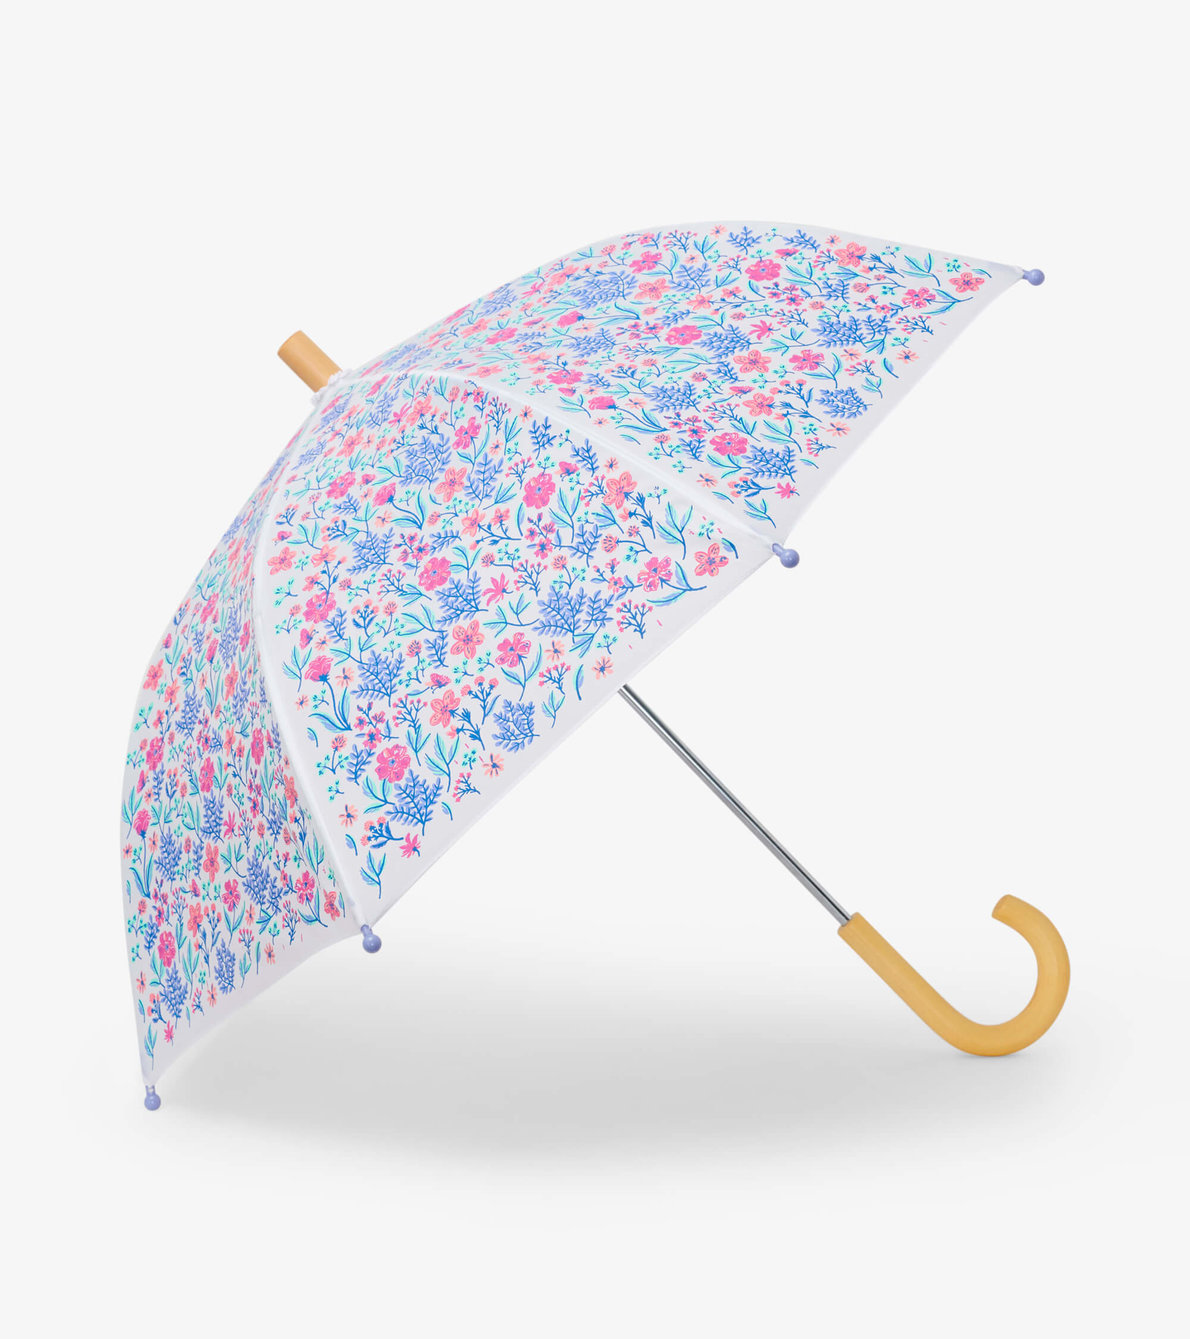 View larger image of Wild Flowers Umbrella